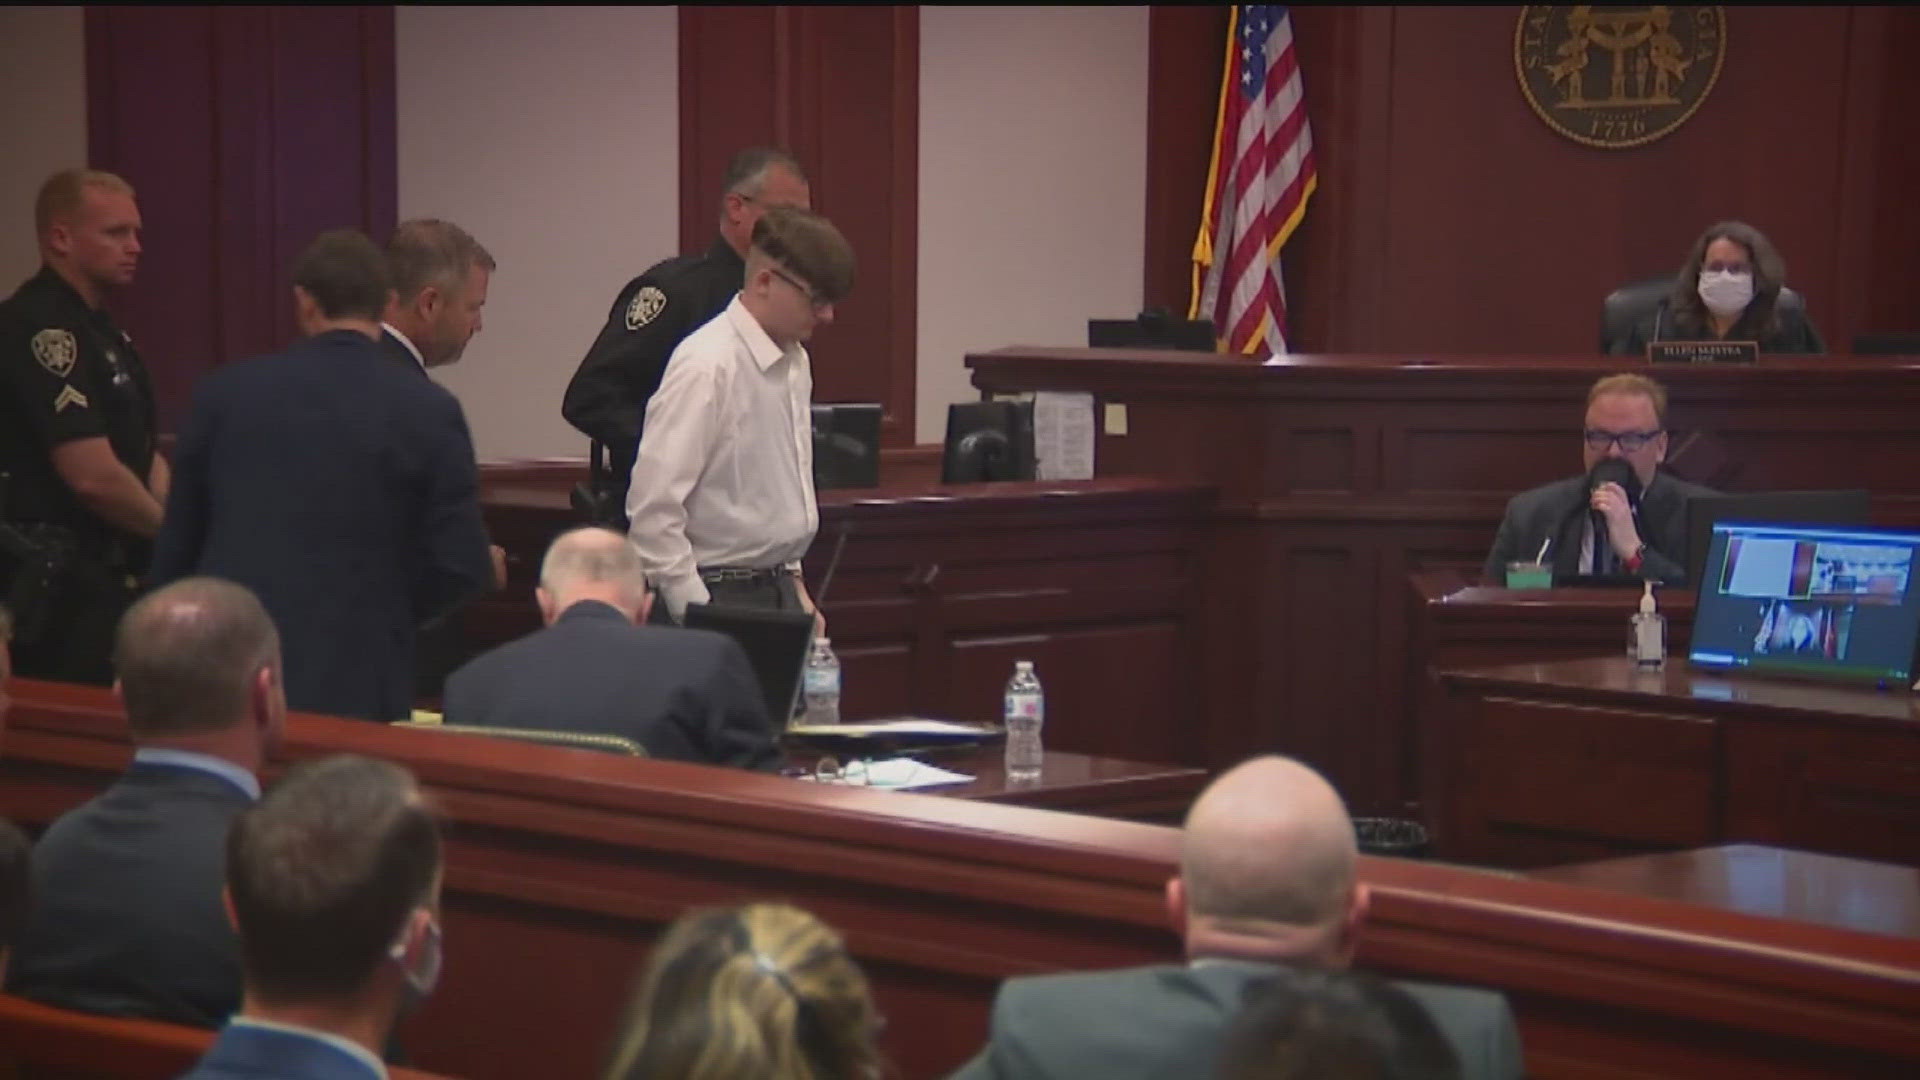 Robert Aaron Long was originally set to appear this morning in a Fulton County courtroom.